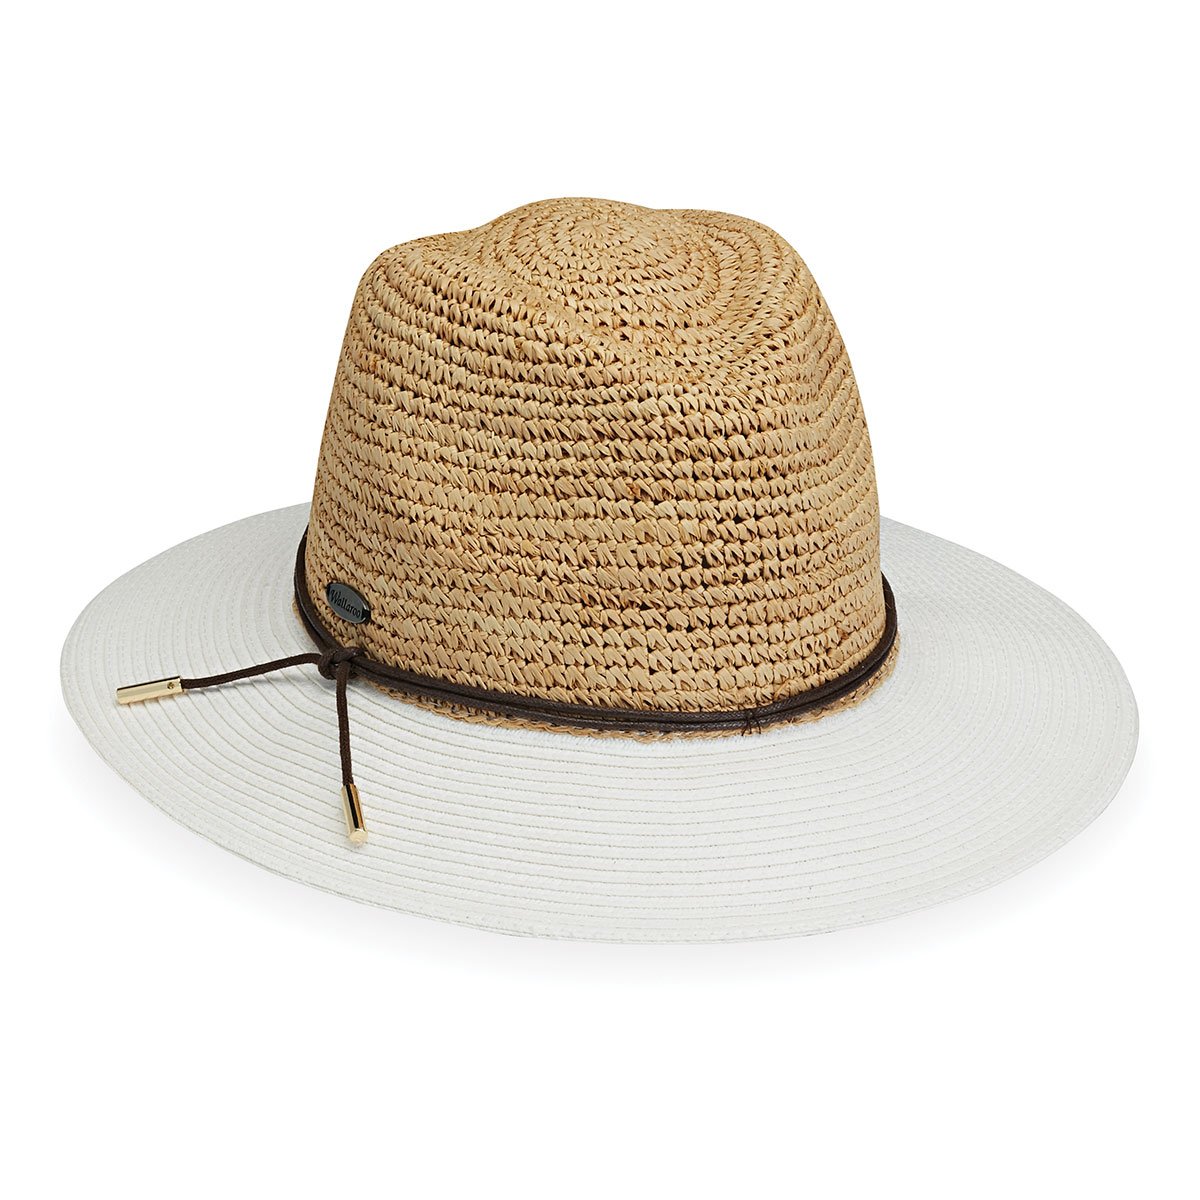 Featuring Front View of Women's Adjustable Fedora Style Laguna Raffia Sun Hat in Natural White from Wallaroo